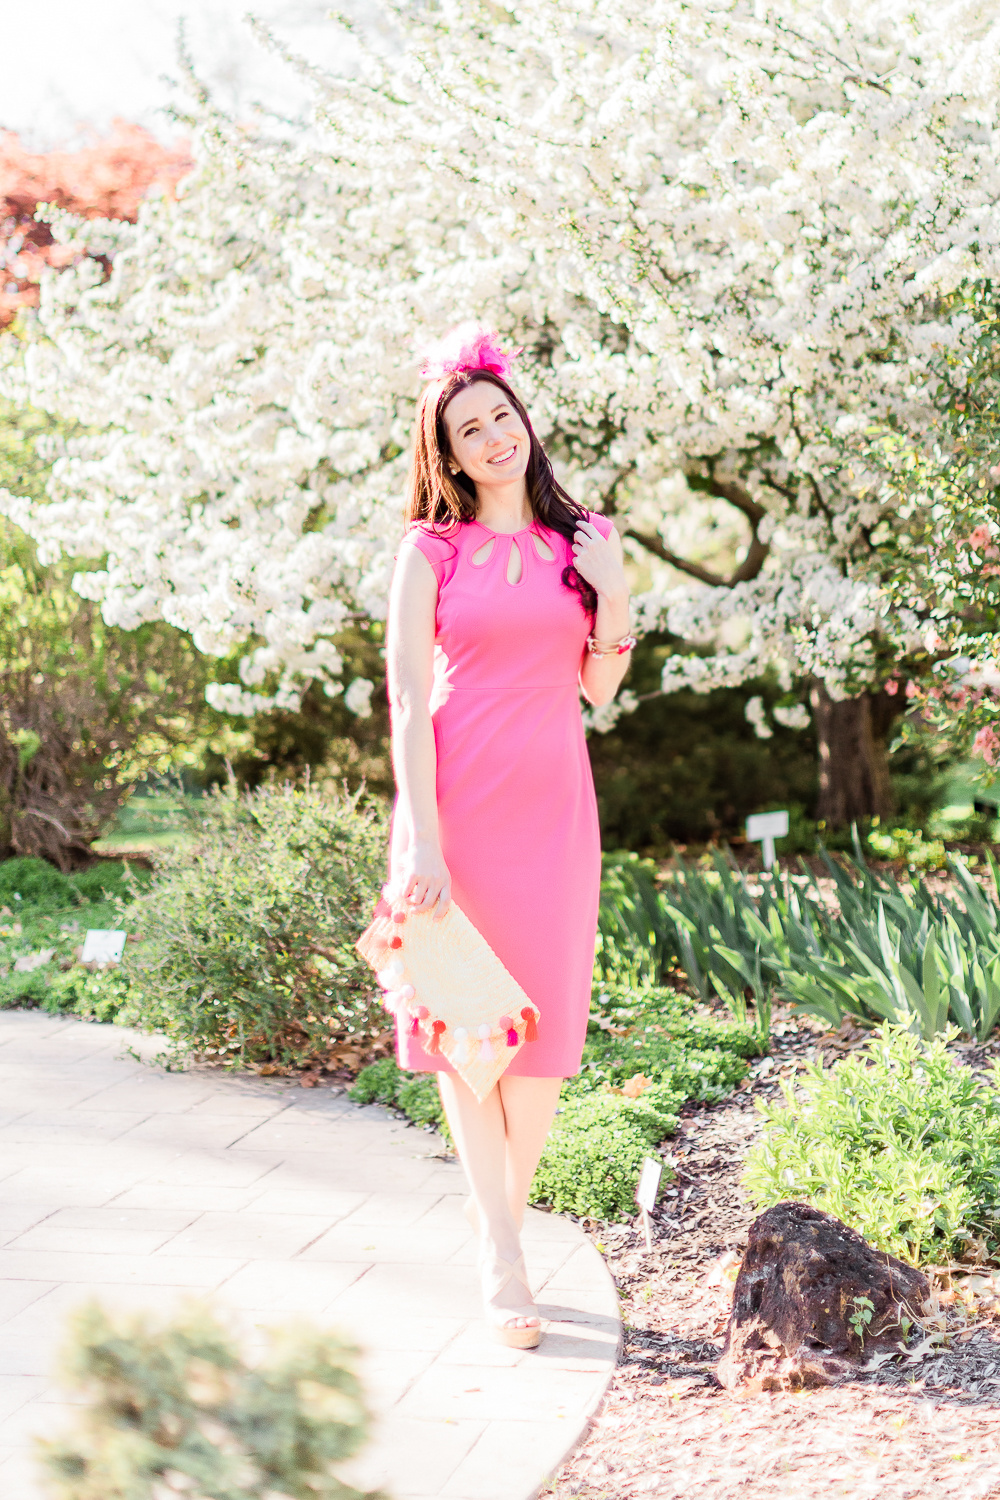 Maggy London Alyssa Midi Dress styled with a pink fascinator headband, straw pom pom and tassel clutch, and nude Steve Madden wedges, Derby Day Style Guide: 3 Head-to-Toe Kentucky Derby Outfit Ideas by affordable fashion blogger Stephanie Ziajka from Diary of a Debutante